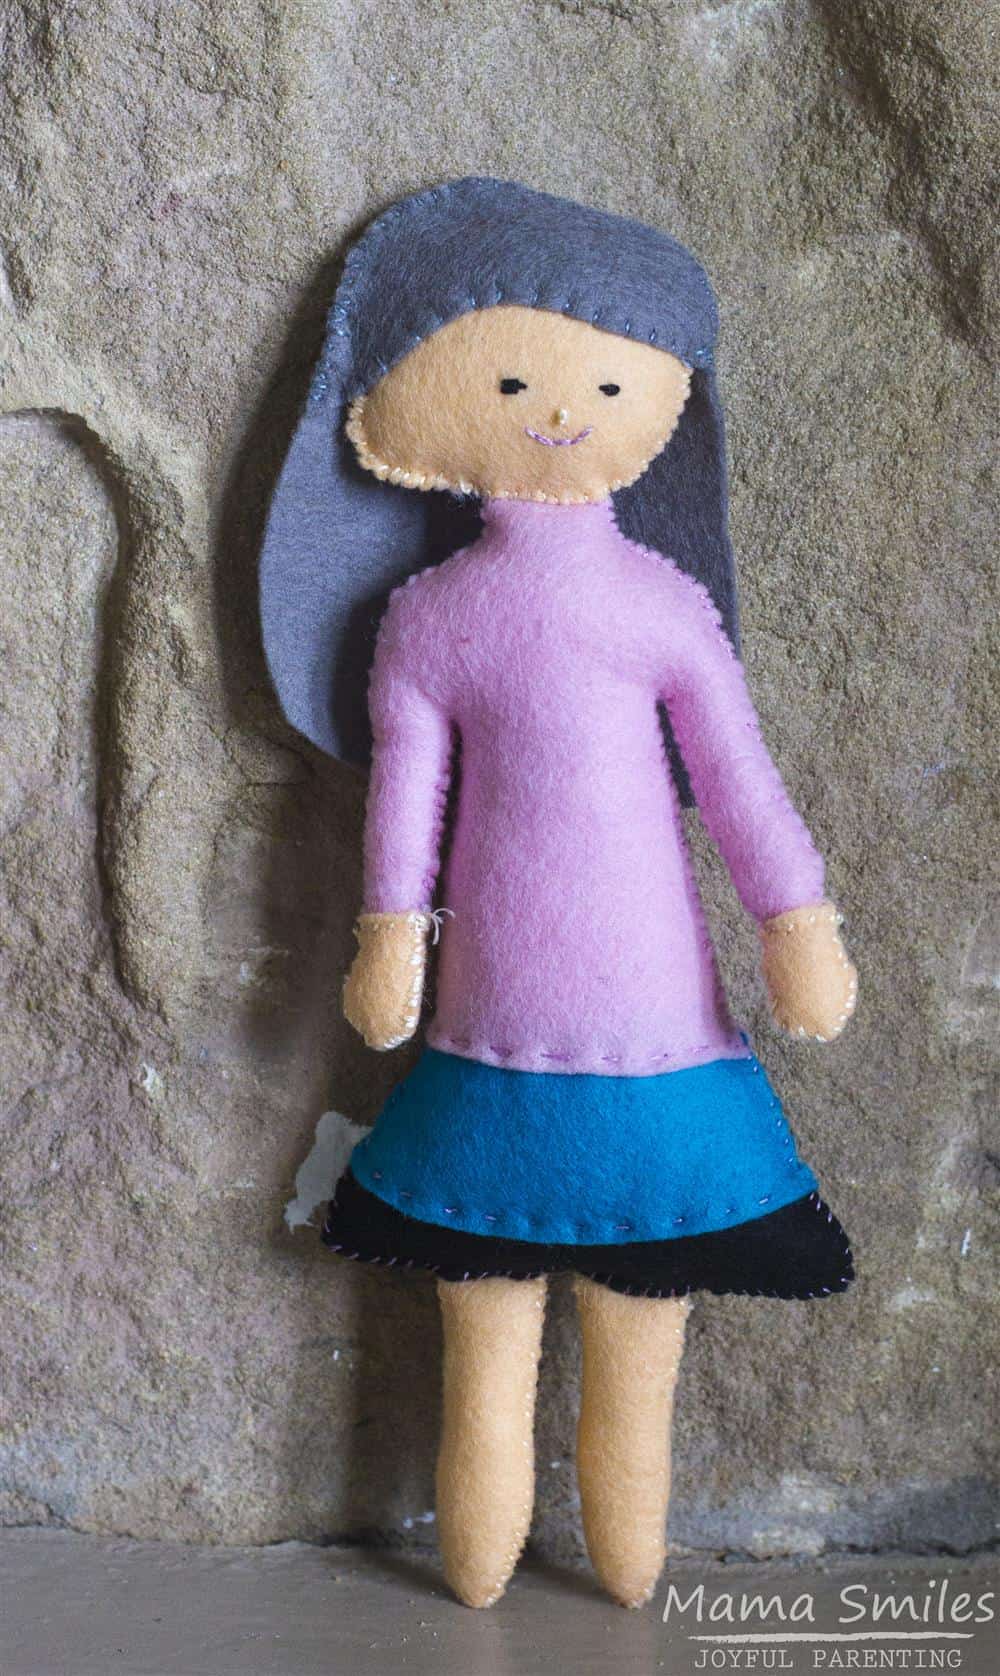 Pure whimsy! Sew this adorable felt doll based off of a child's drawing by following the tutorial and using the free pattern in this post.